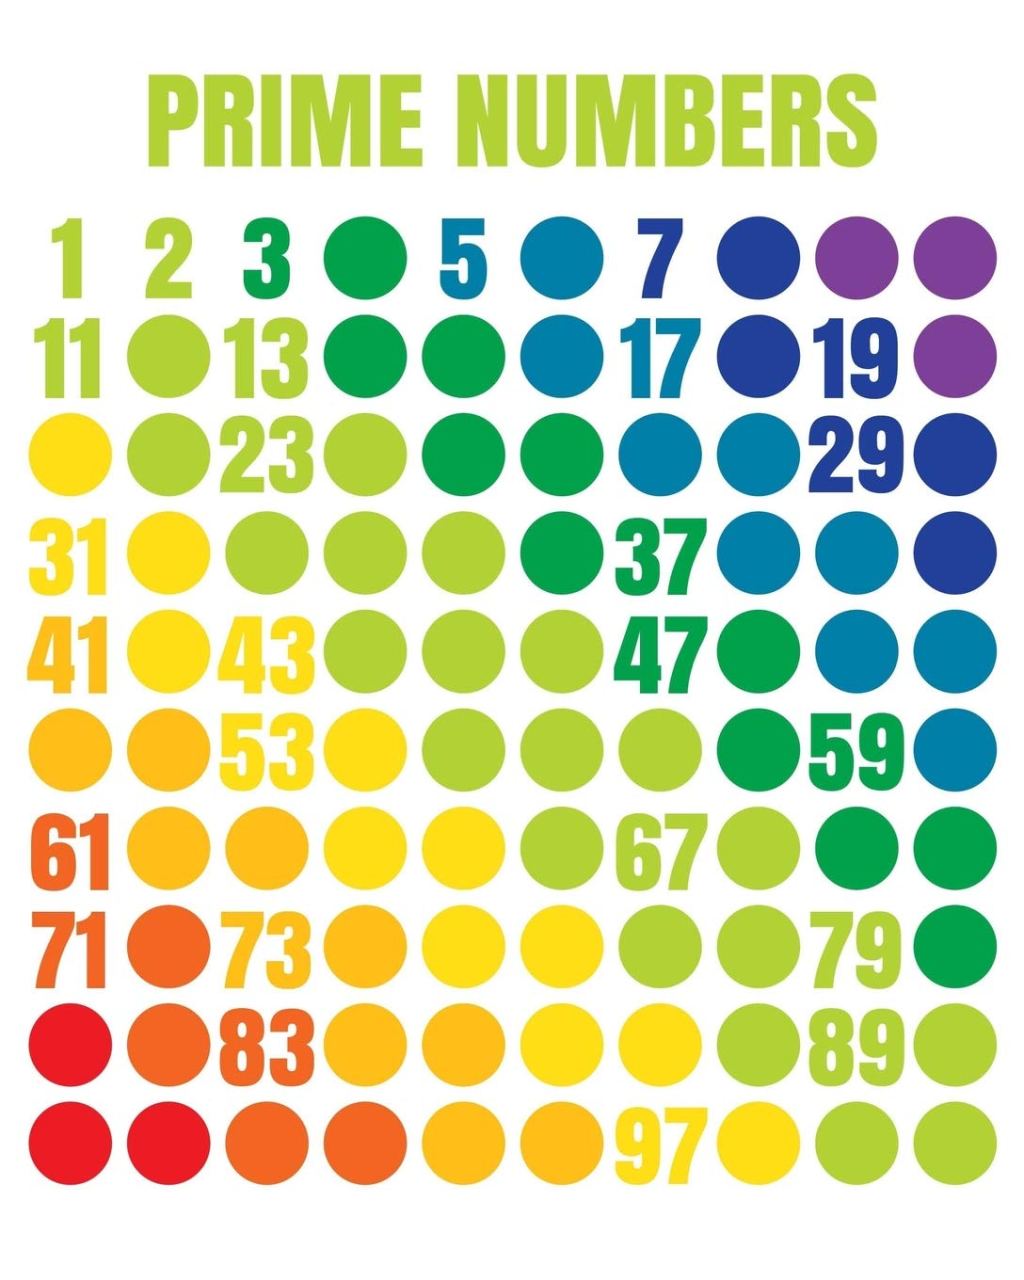 Playing With Prime Numbers